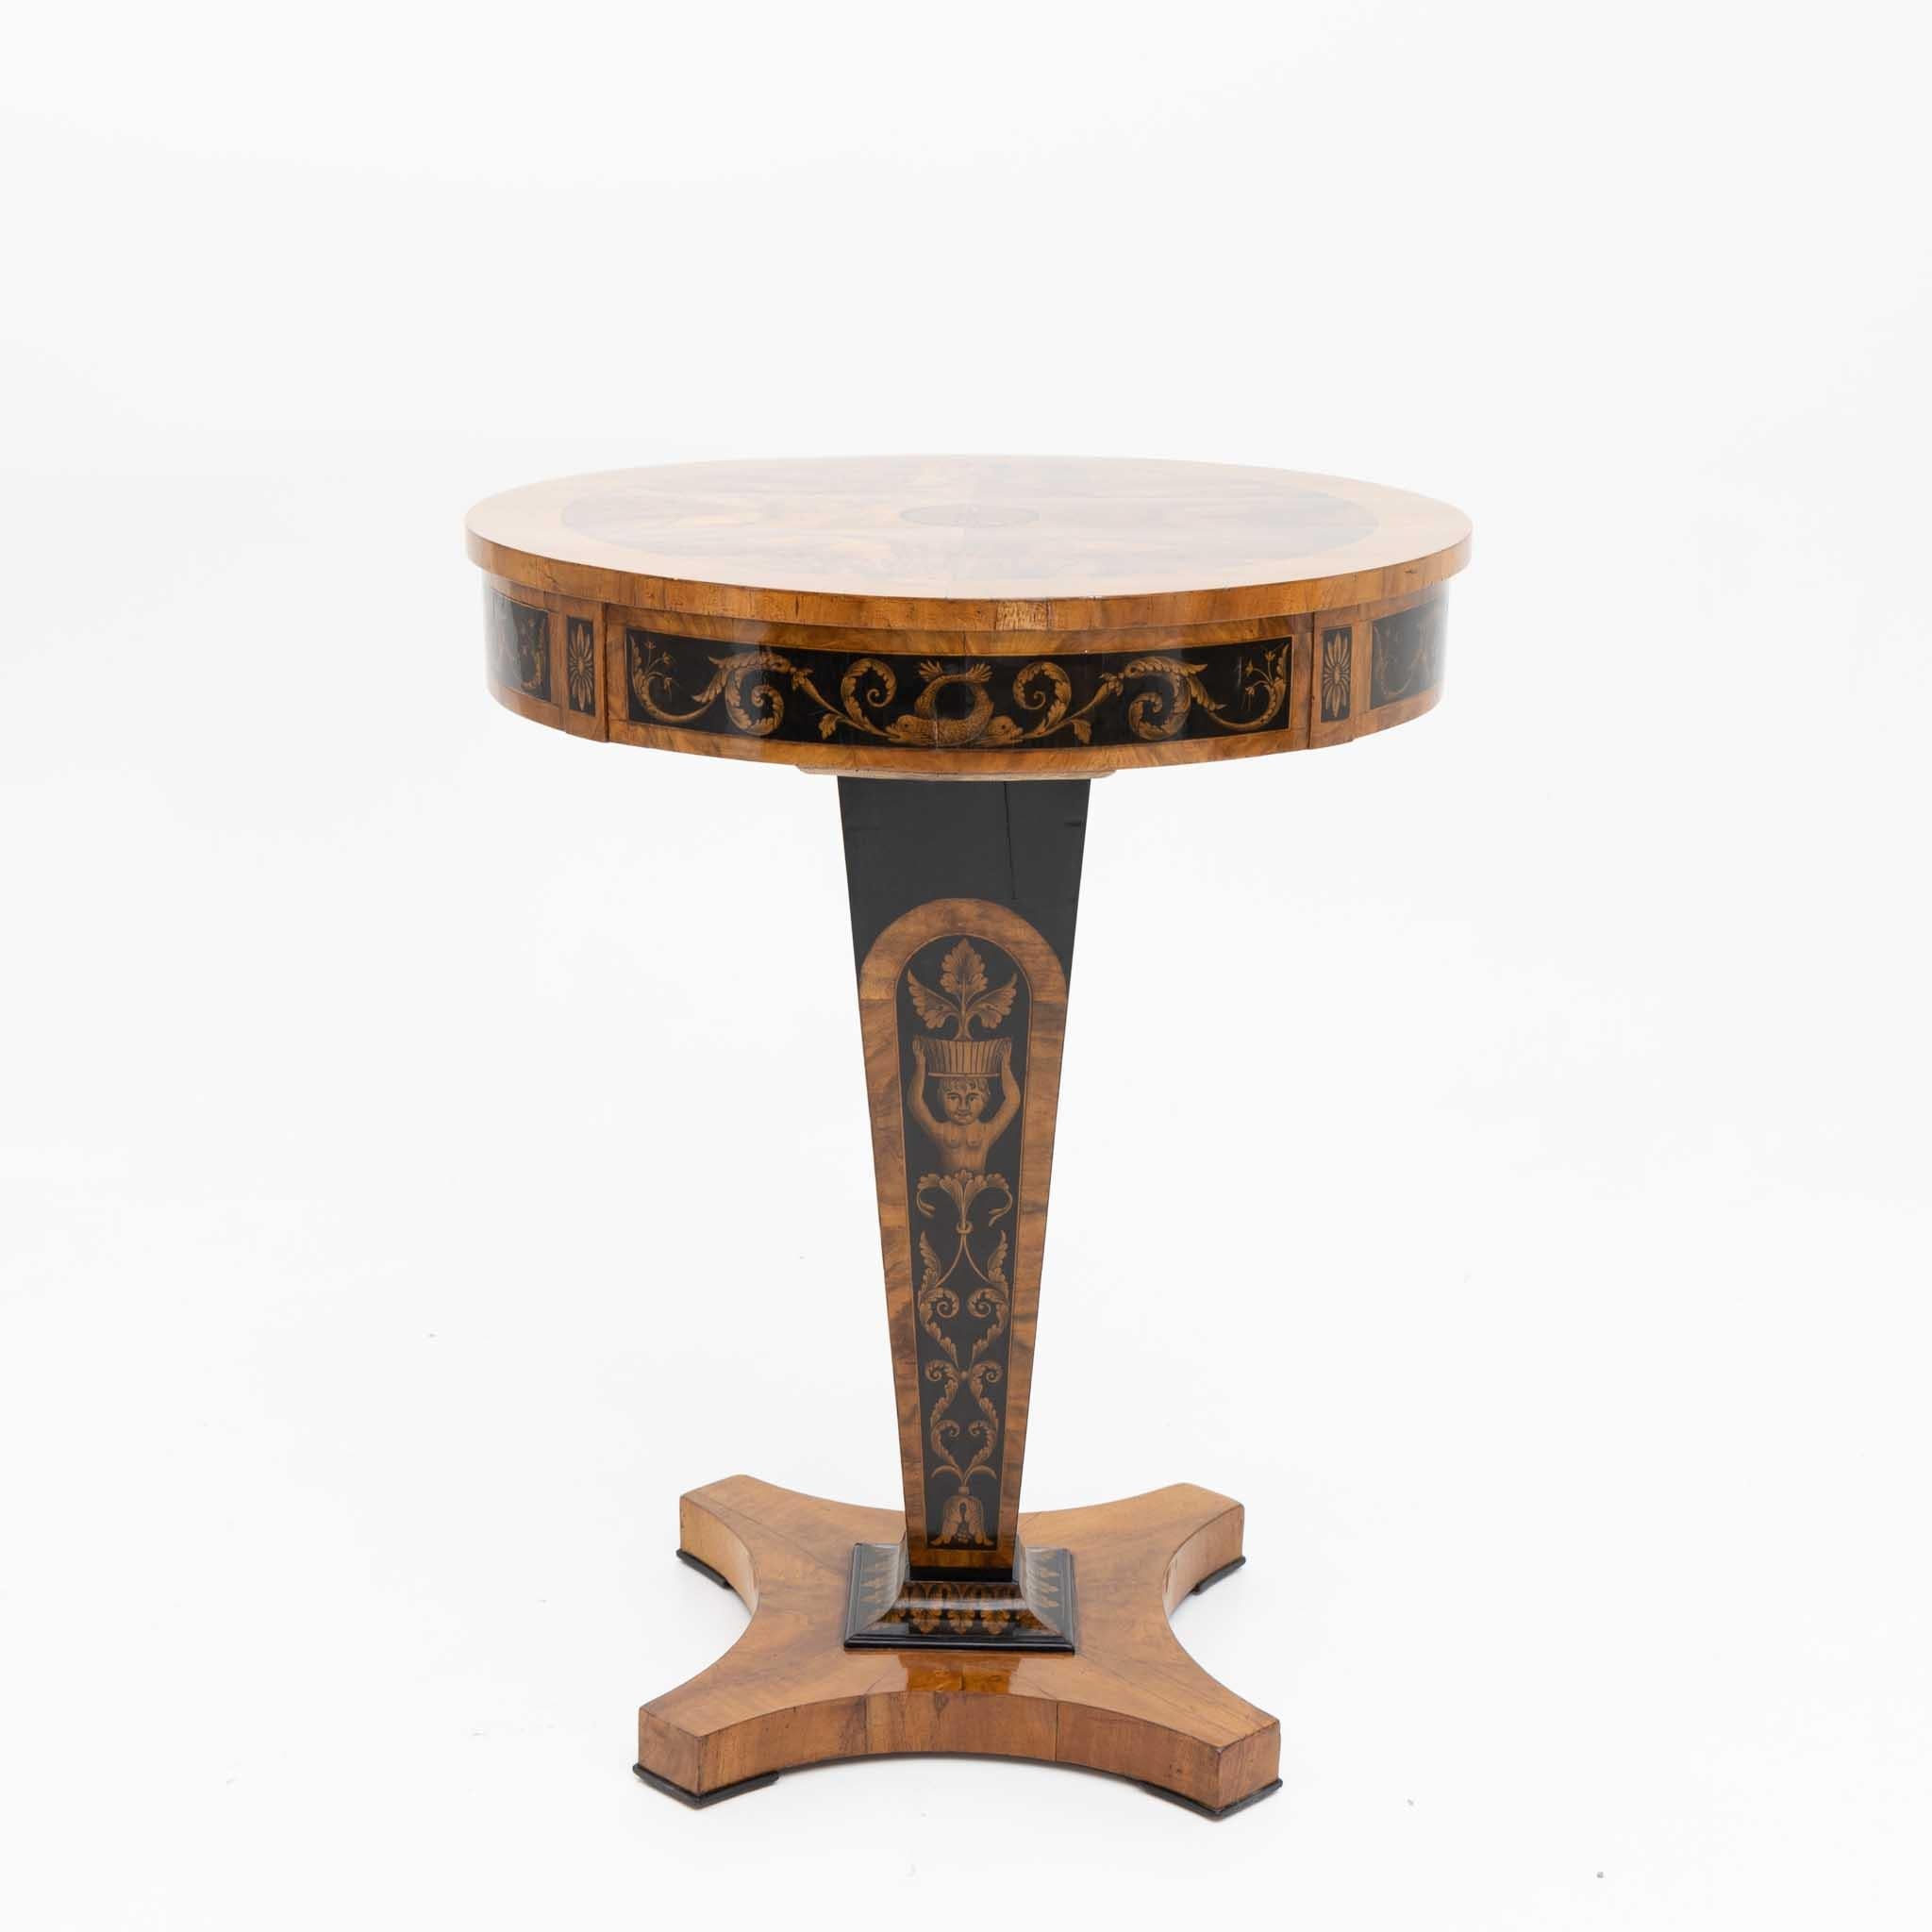 Round Empire side table with one drawer. The table is veneered in walnut and shows black ink painting with dolphin motifs and vines on the frame and on the downward tapering stand. The table rests on a quatrefoil base. It has been carefully restored